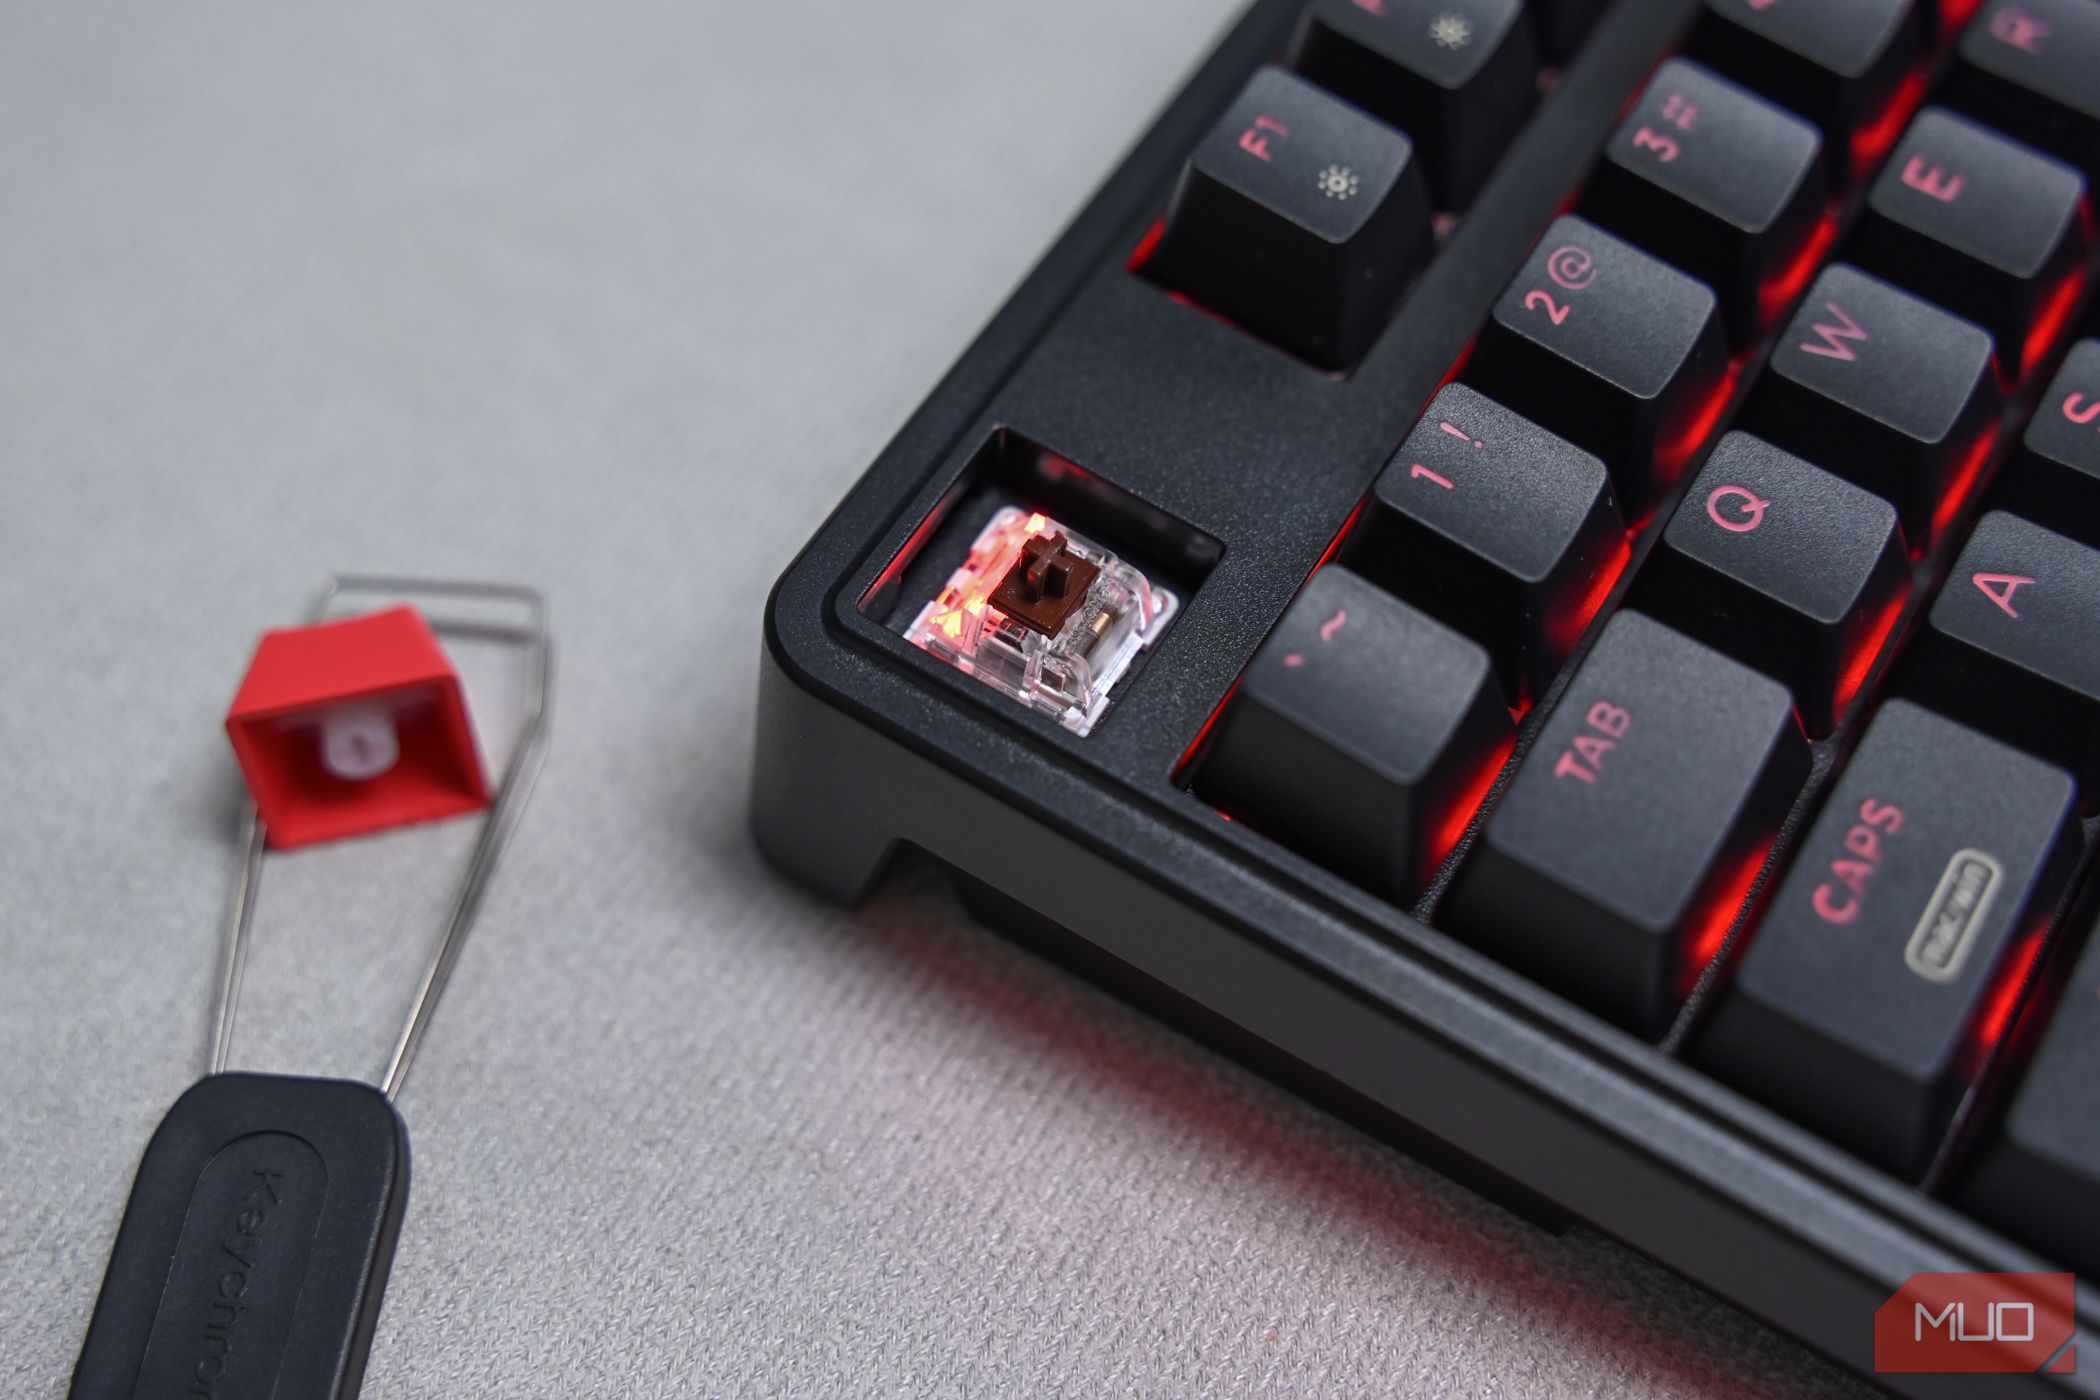 ESC keycap removed from the The Keychron C3 Pro